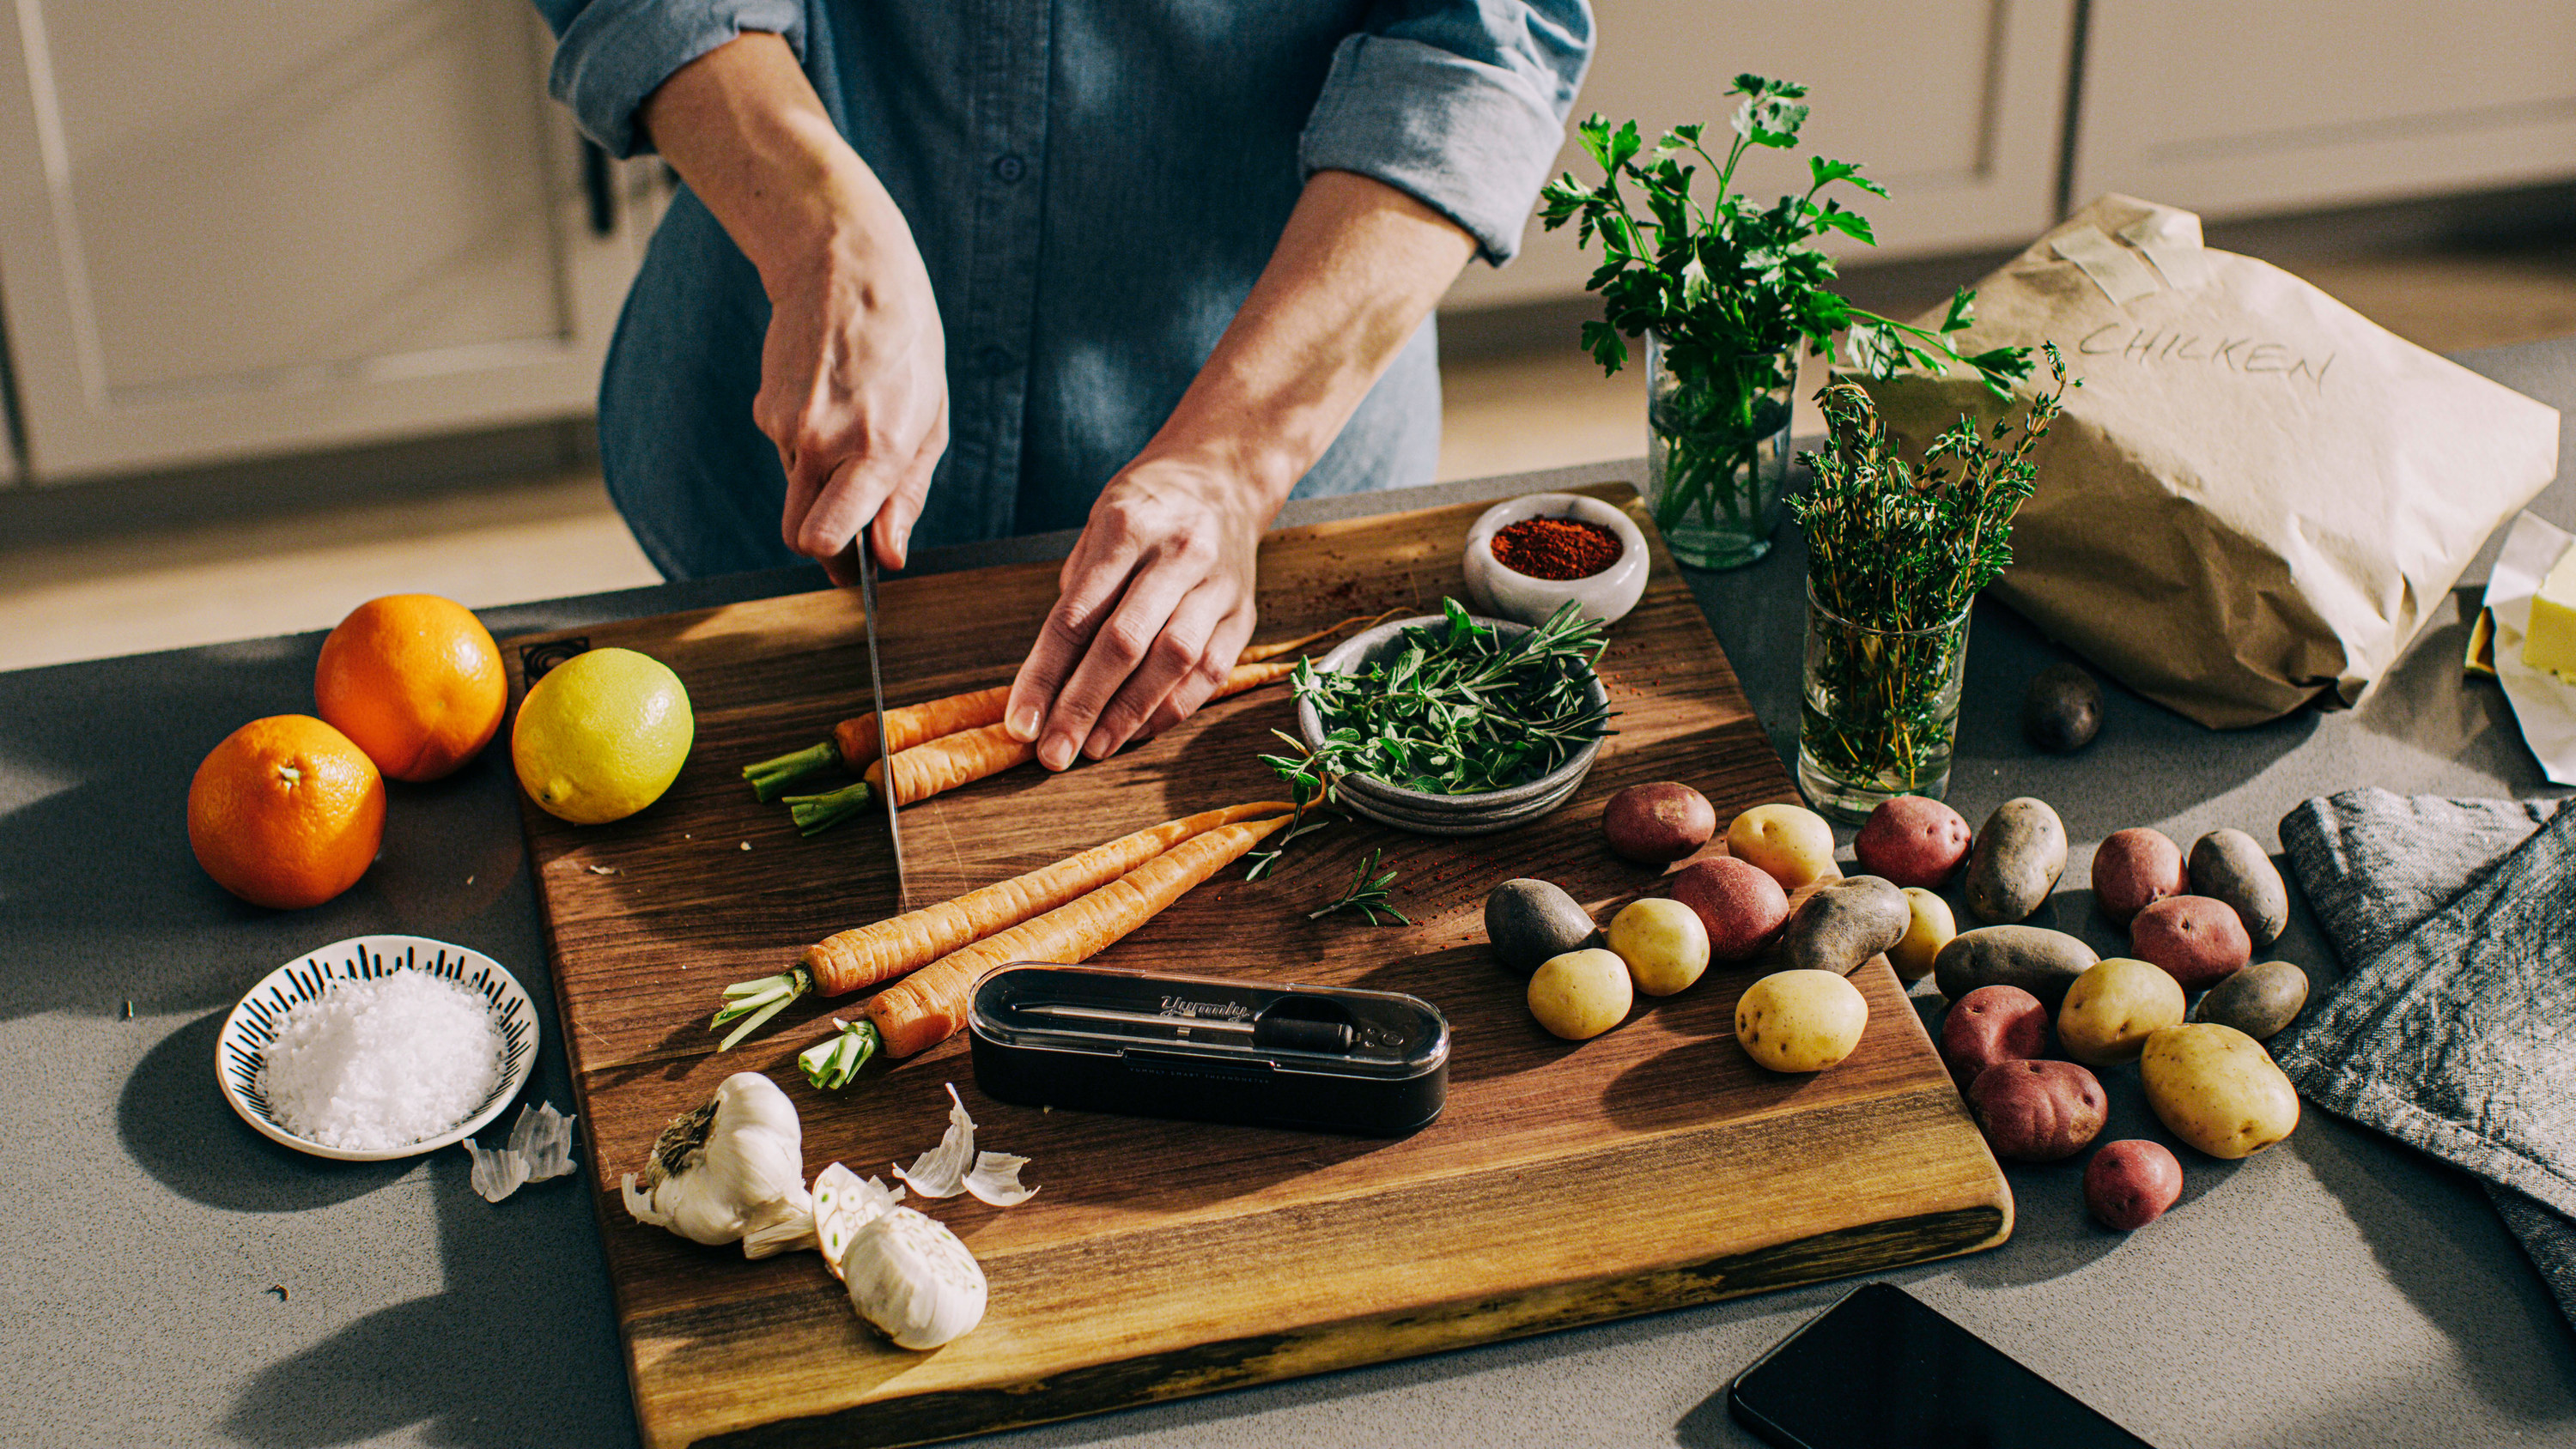 A person cuts carrots on a cutting board beside the Yummly® Smart Thermometer.